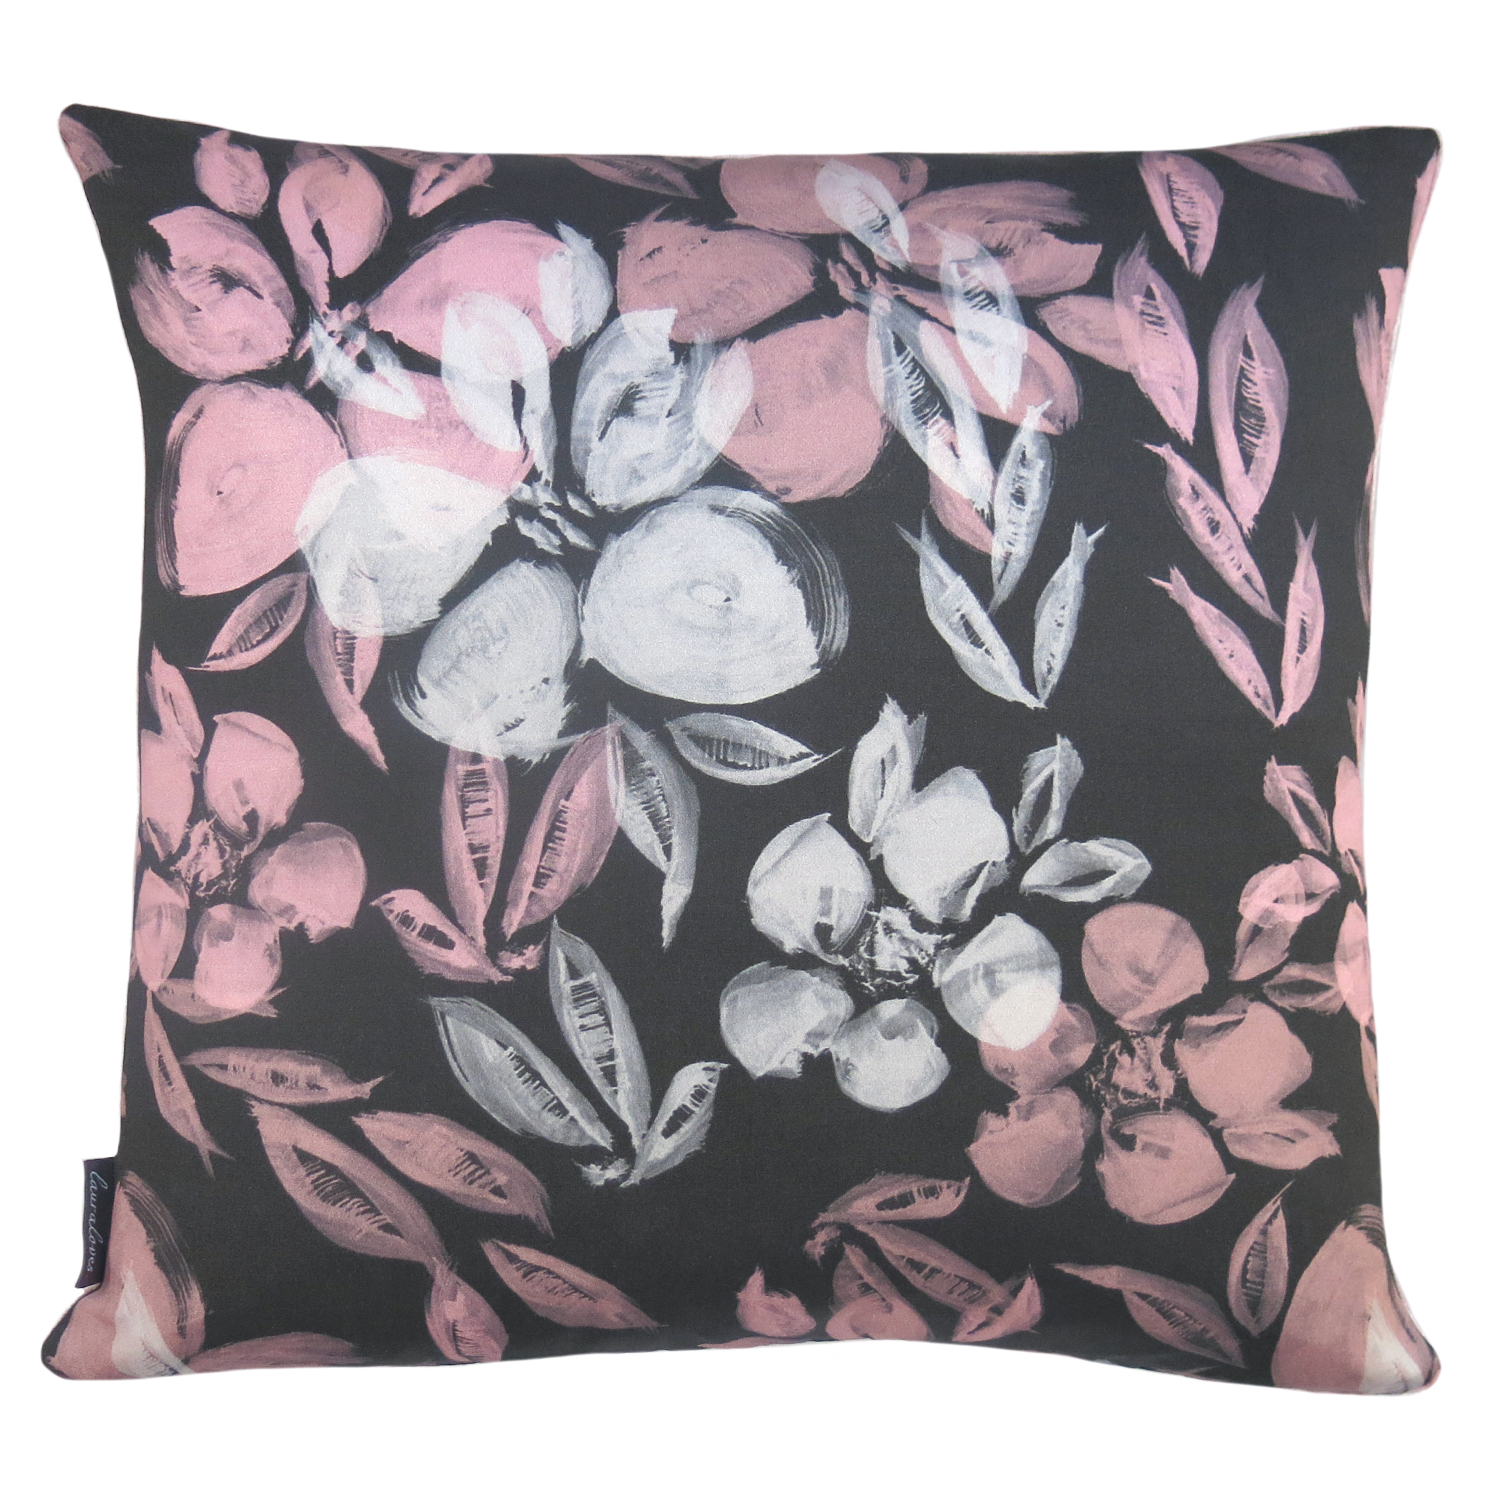 Evelyn-Floral-Silk-Cotton-Velvet-Luxury-Cushion-hand-made-pale-pink-grey-white-size-18%22x18%22-hand-made-for-bedroom-or-sofa-designed-by-lauraloves-design.jpg